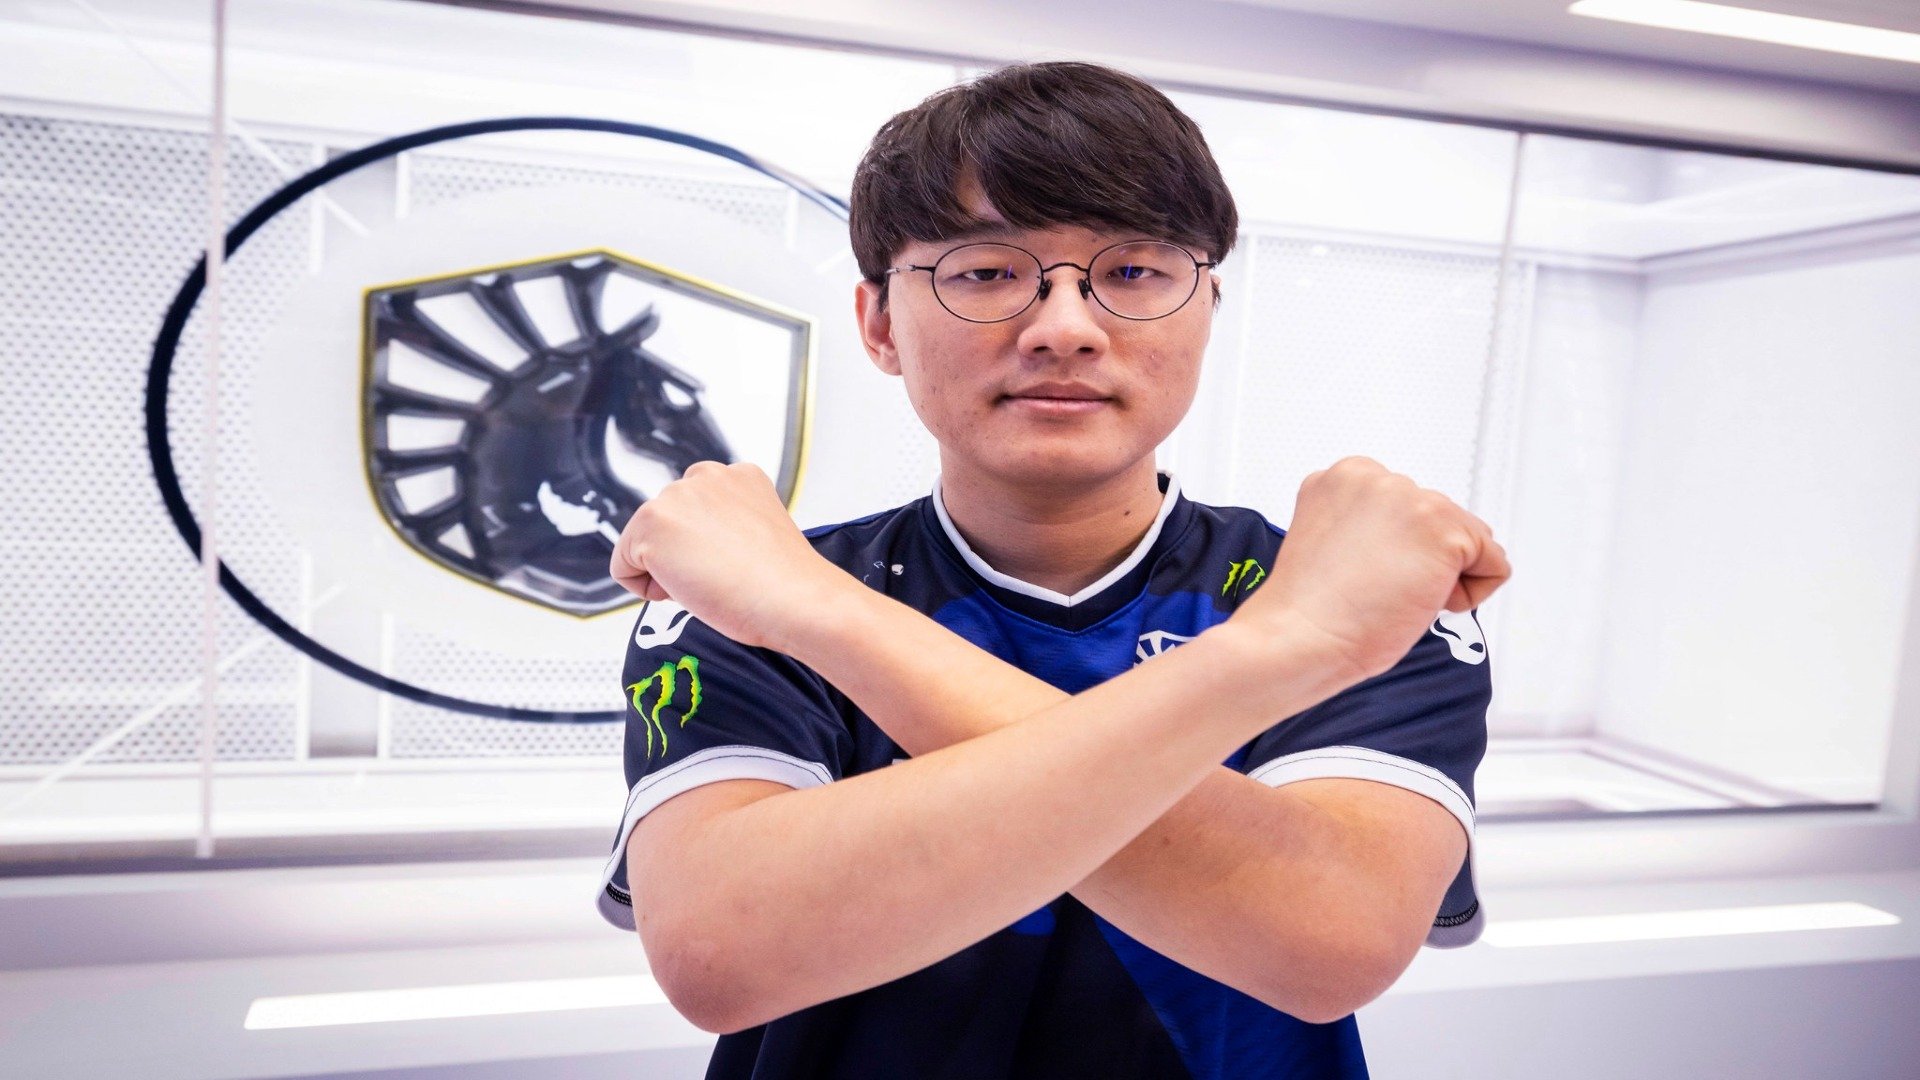 CoreJJ during the "LCS Heroes" photo shoot